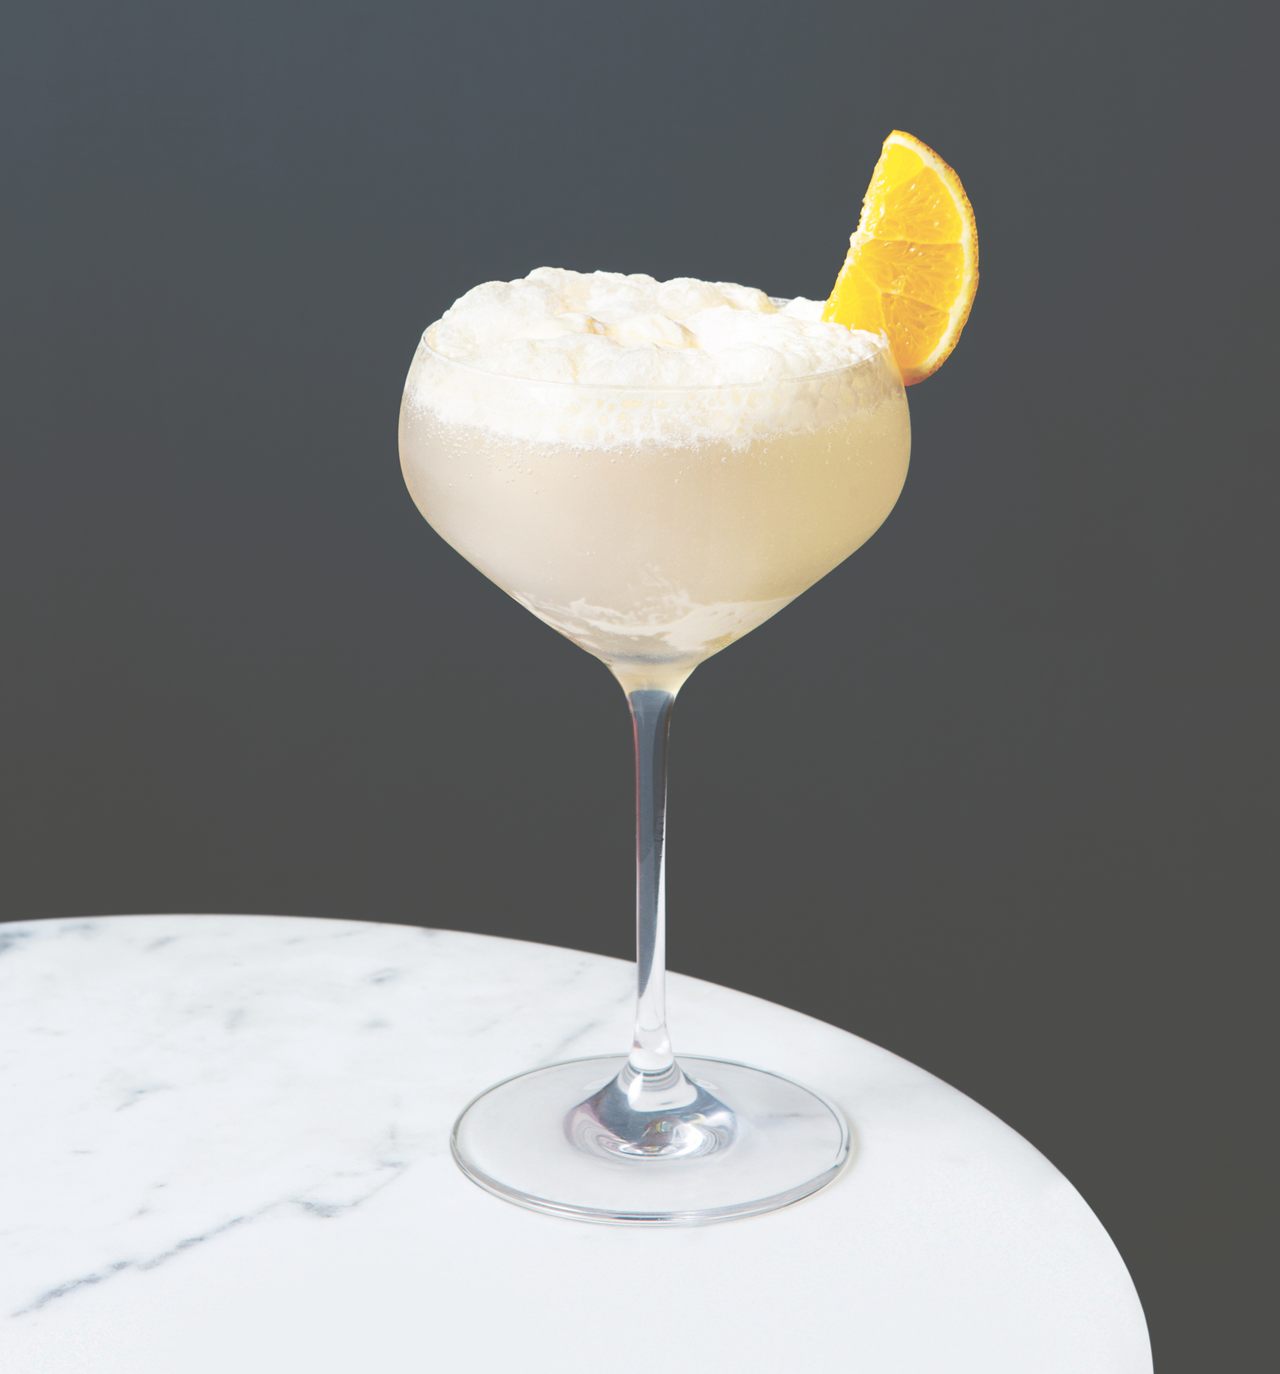 The cloud-like cocktail is one of the last vestiges of Soyer's grand experiment.